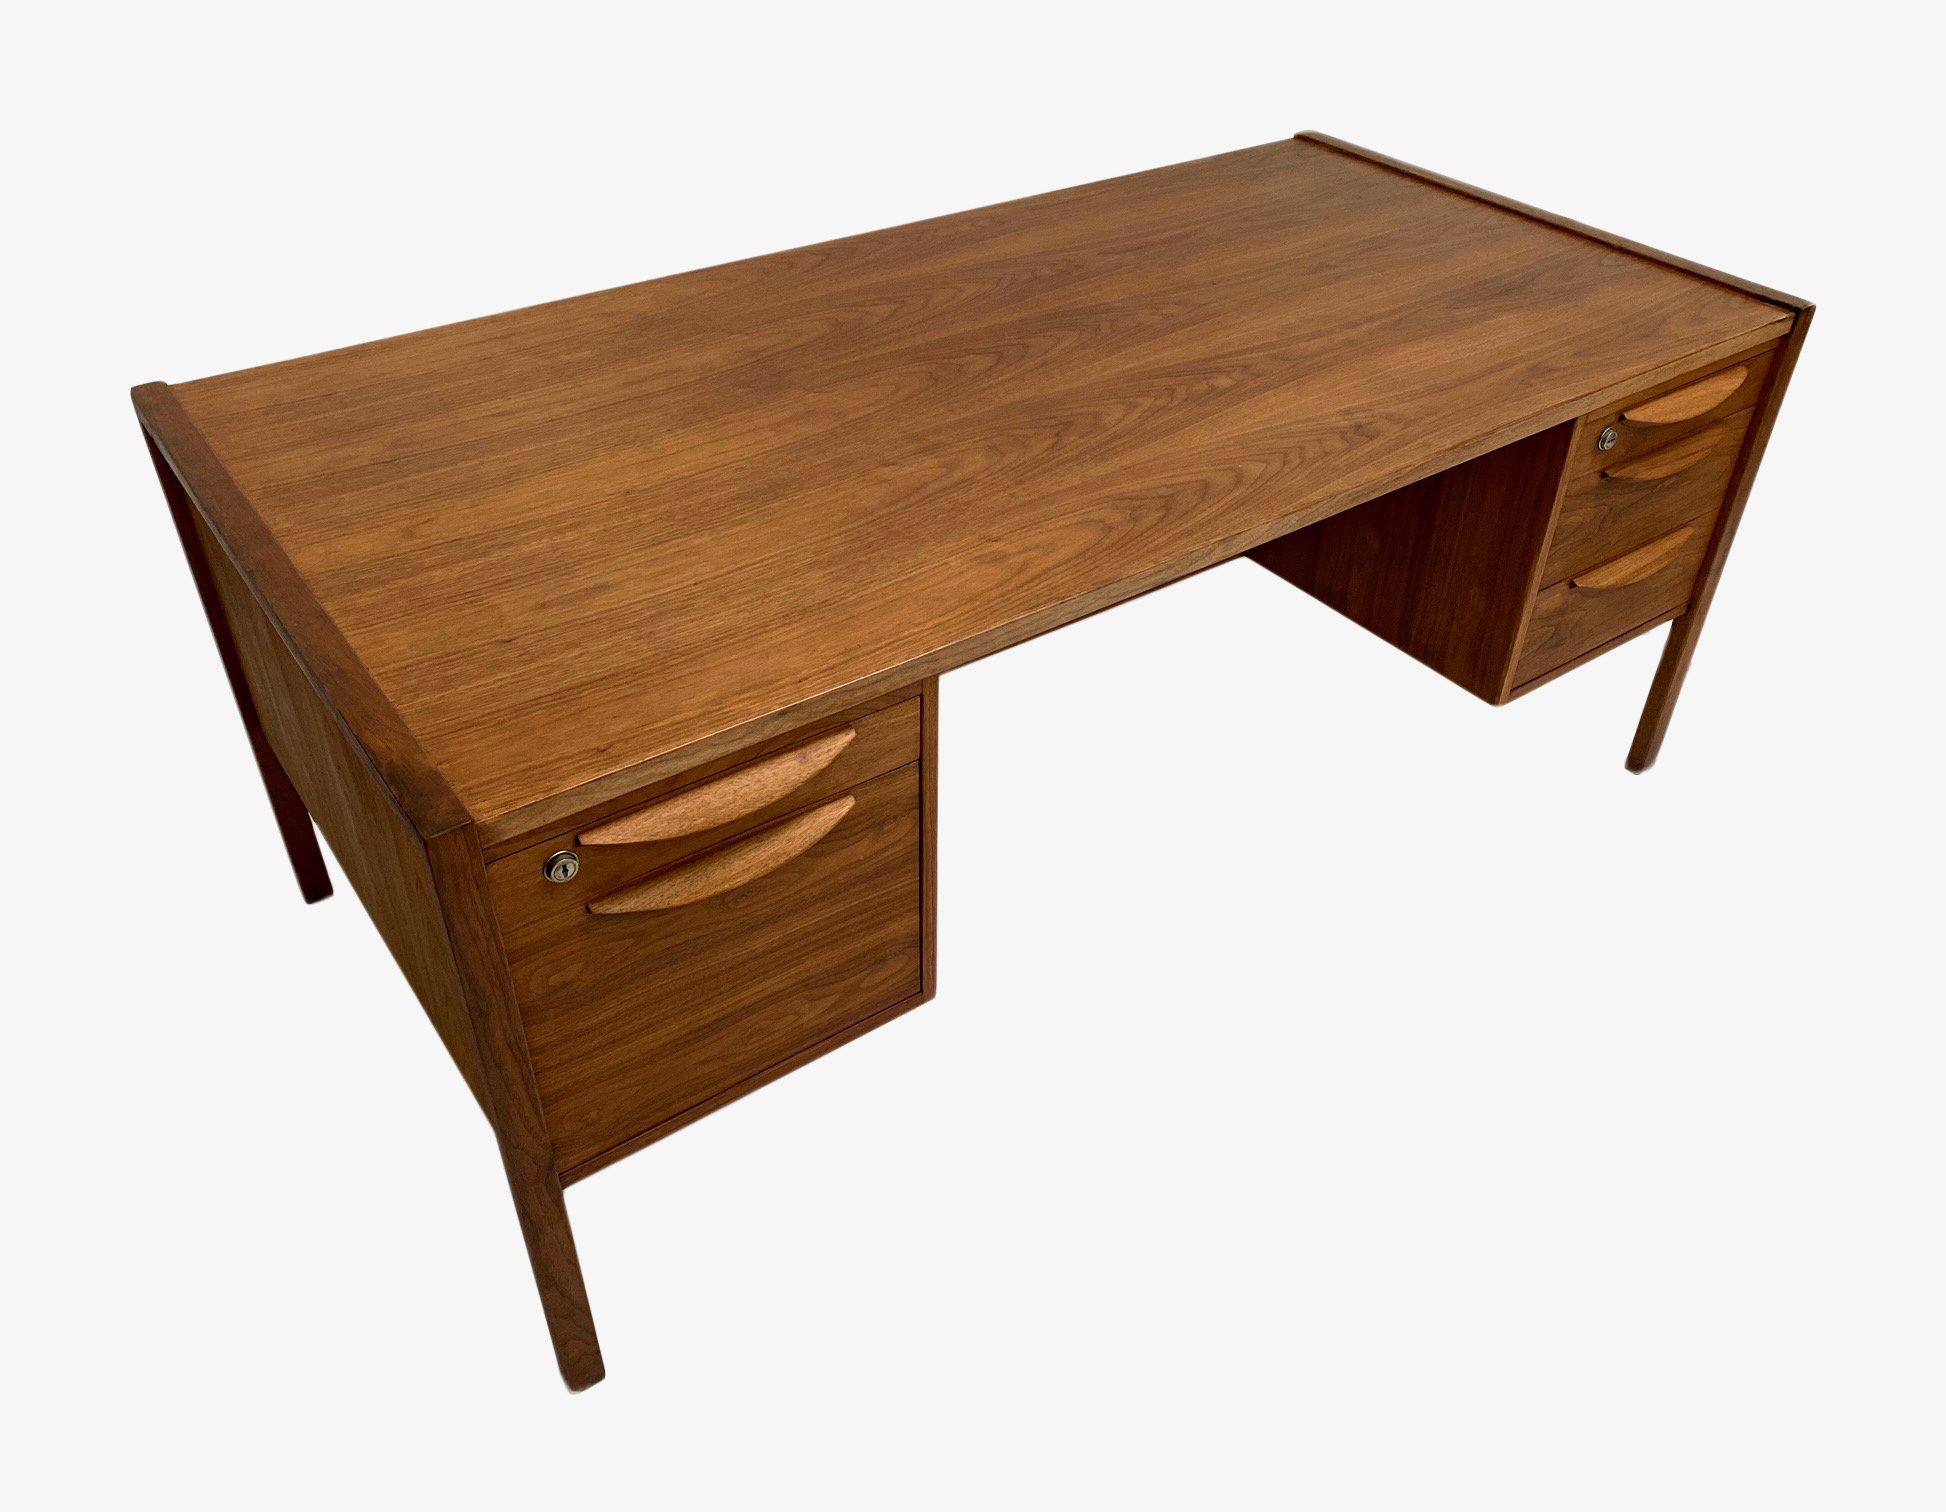 A beautiful large executive walnut writing desk by iconic Danish designer Jens Risom, manufactured by Jens Risom Design in the US. This would make a stylish addition to any work area. A striking piece of classically designed Scandinavian